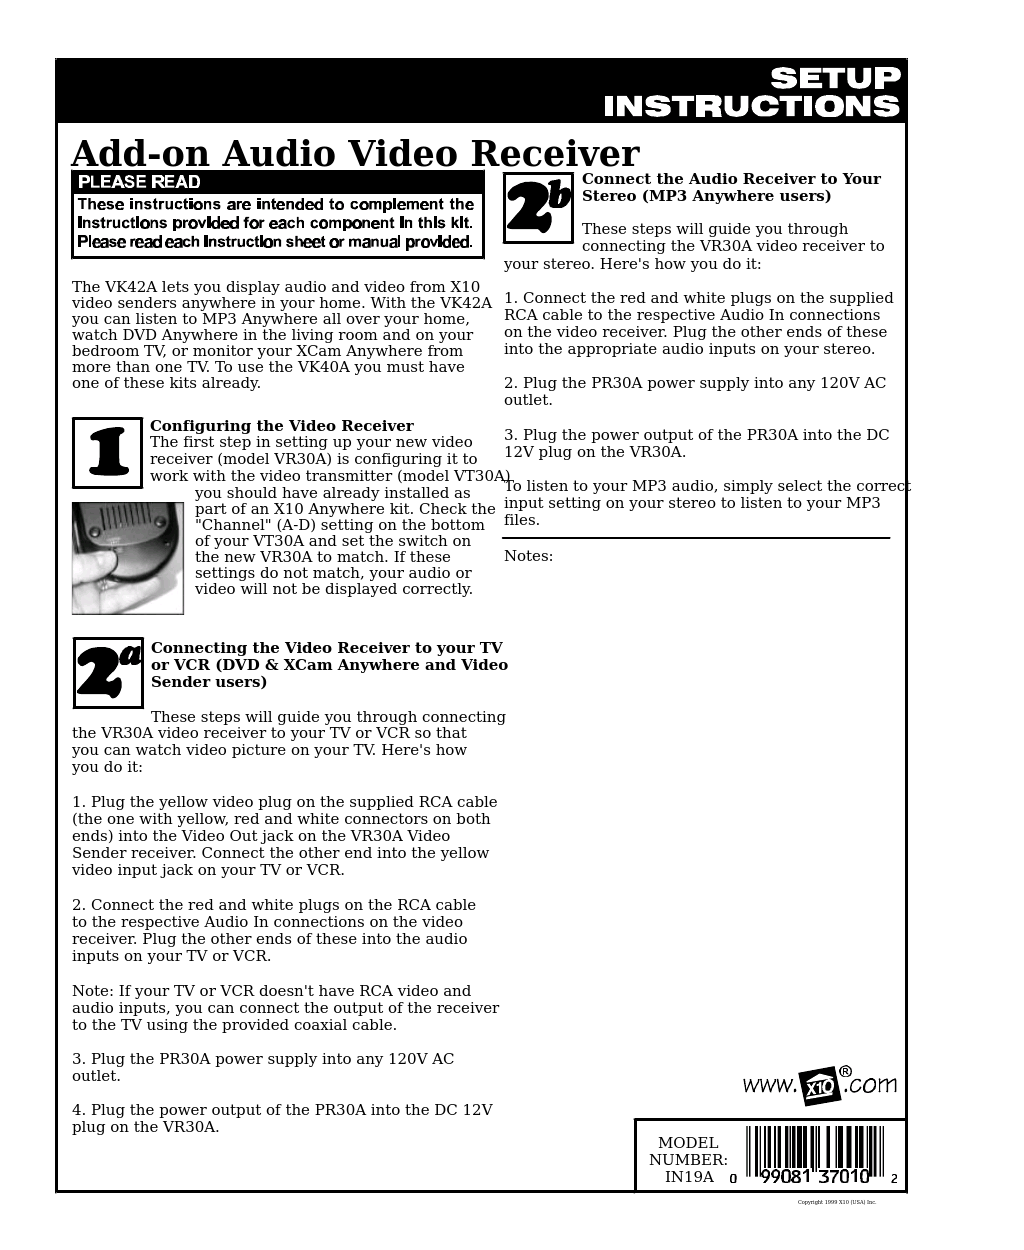 Add-on Audio Video Receiver VK42A